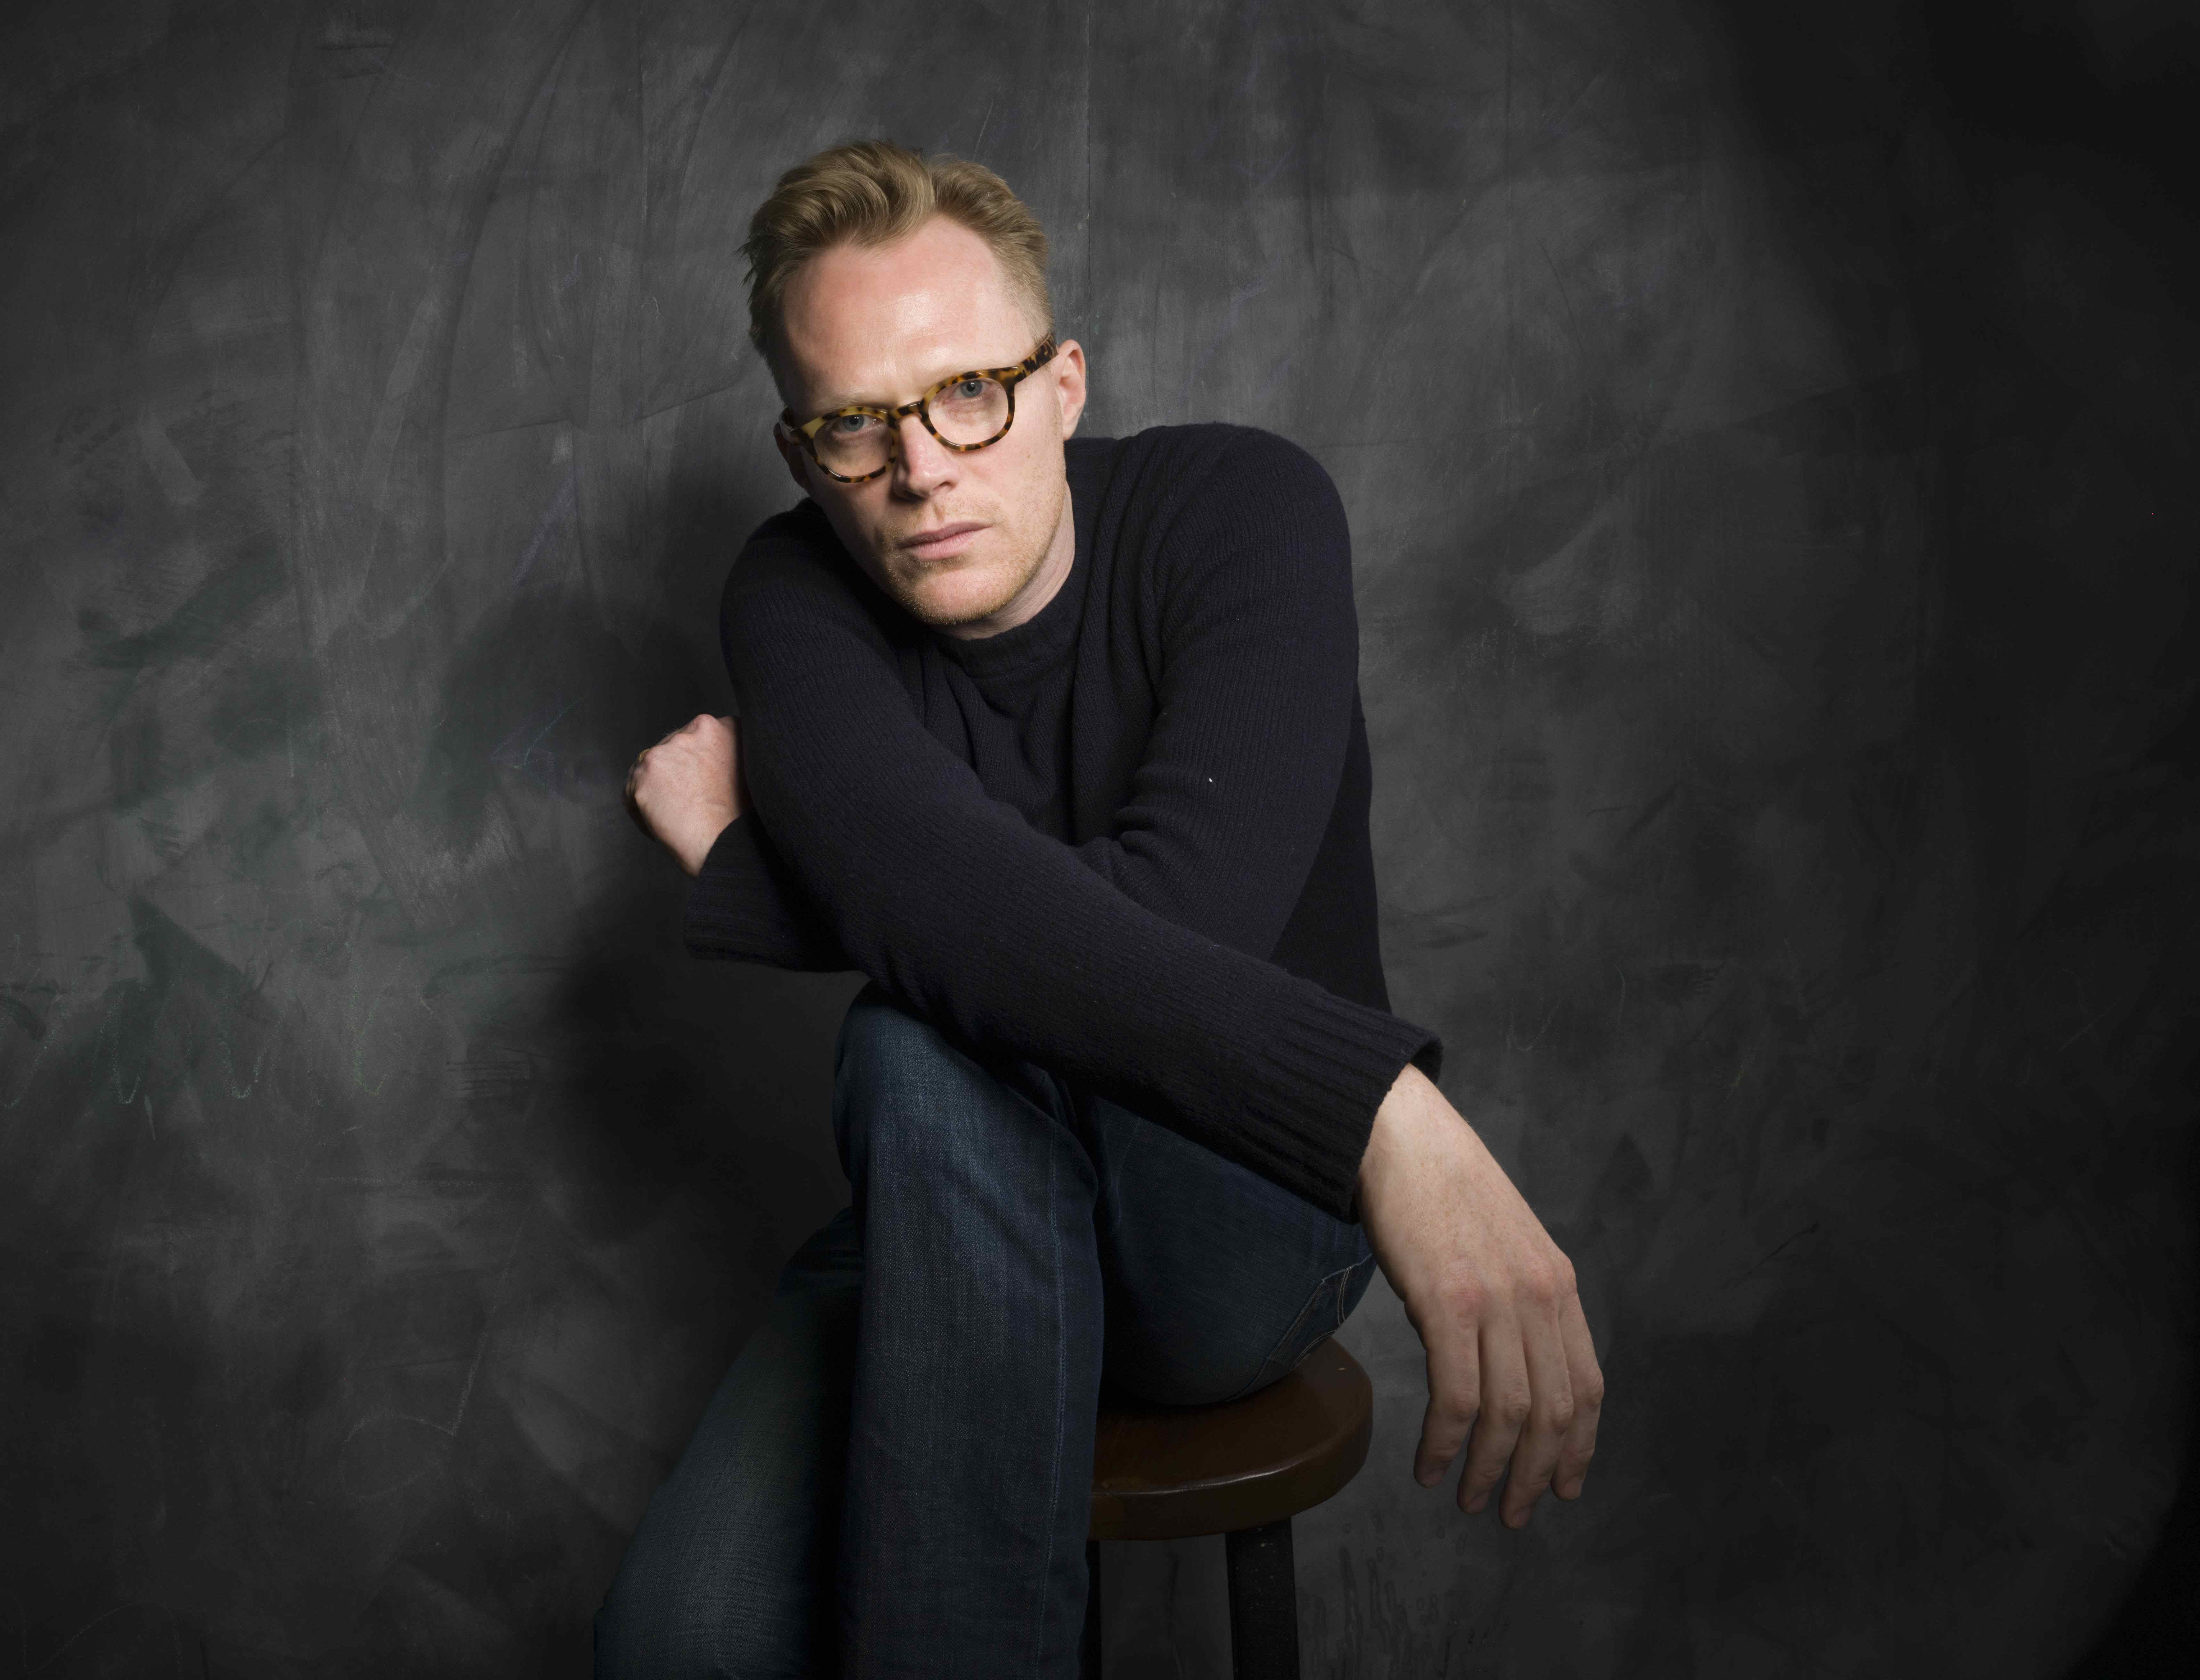 Paul Bettany Wallpaper Image Photos Pictures Background